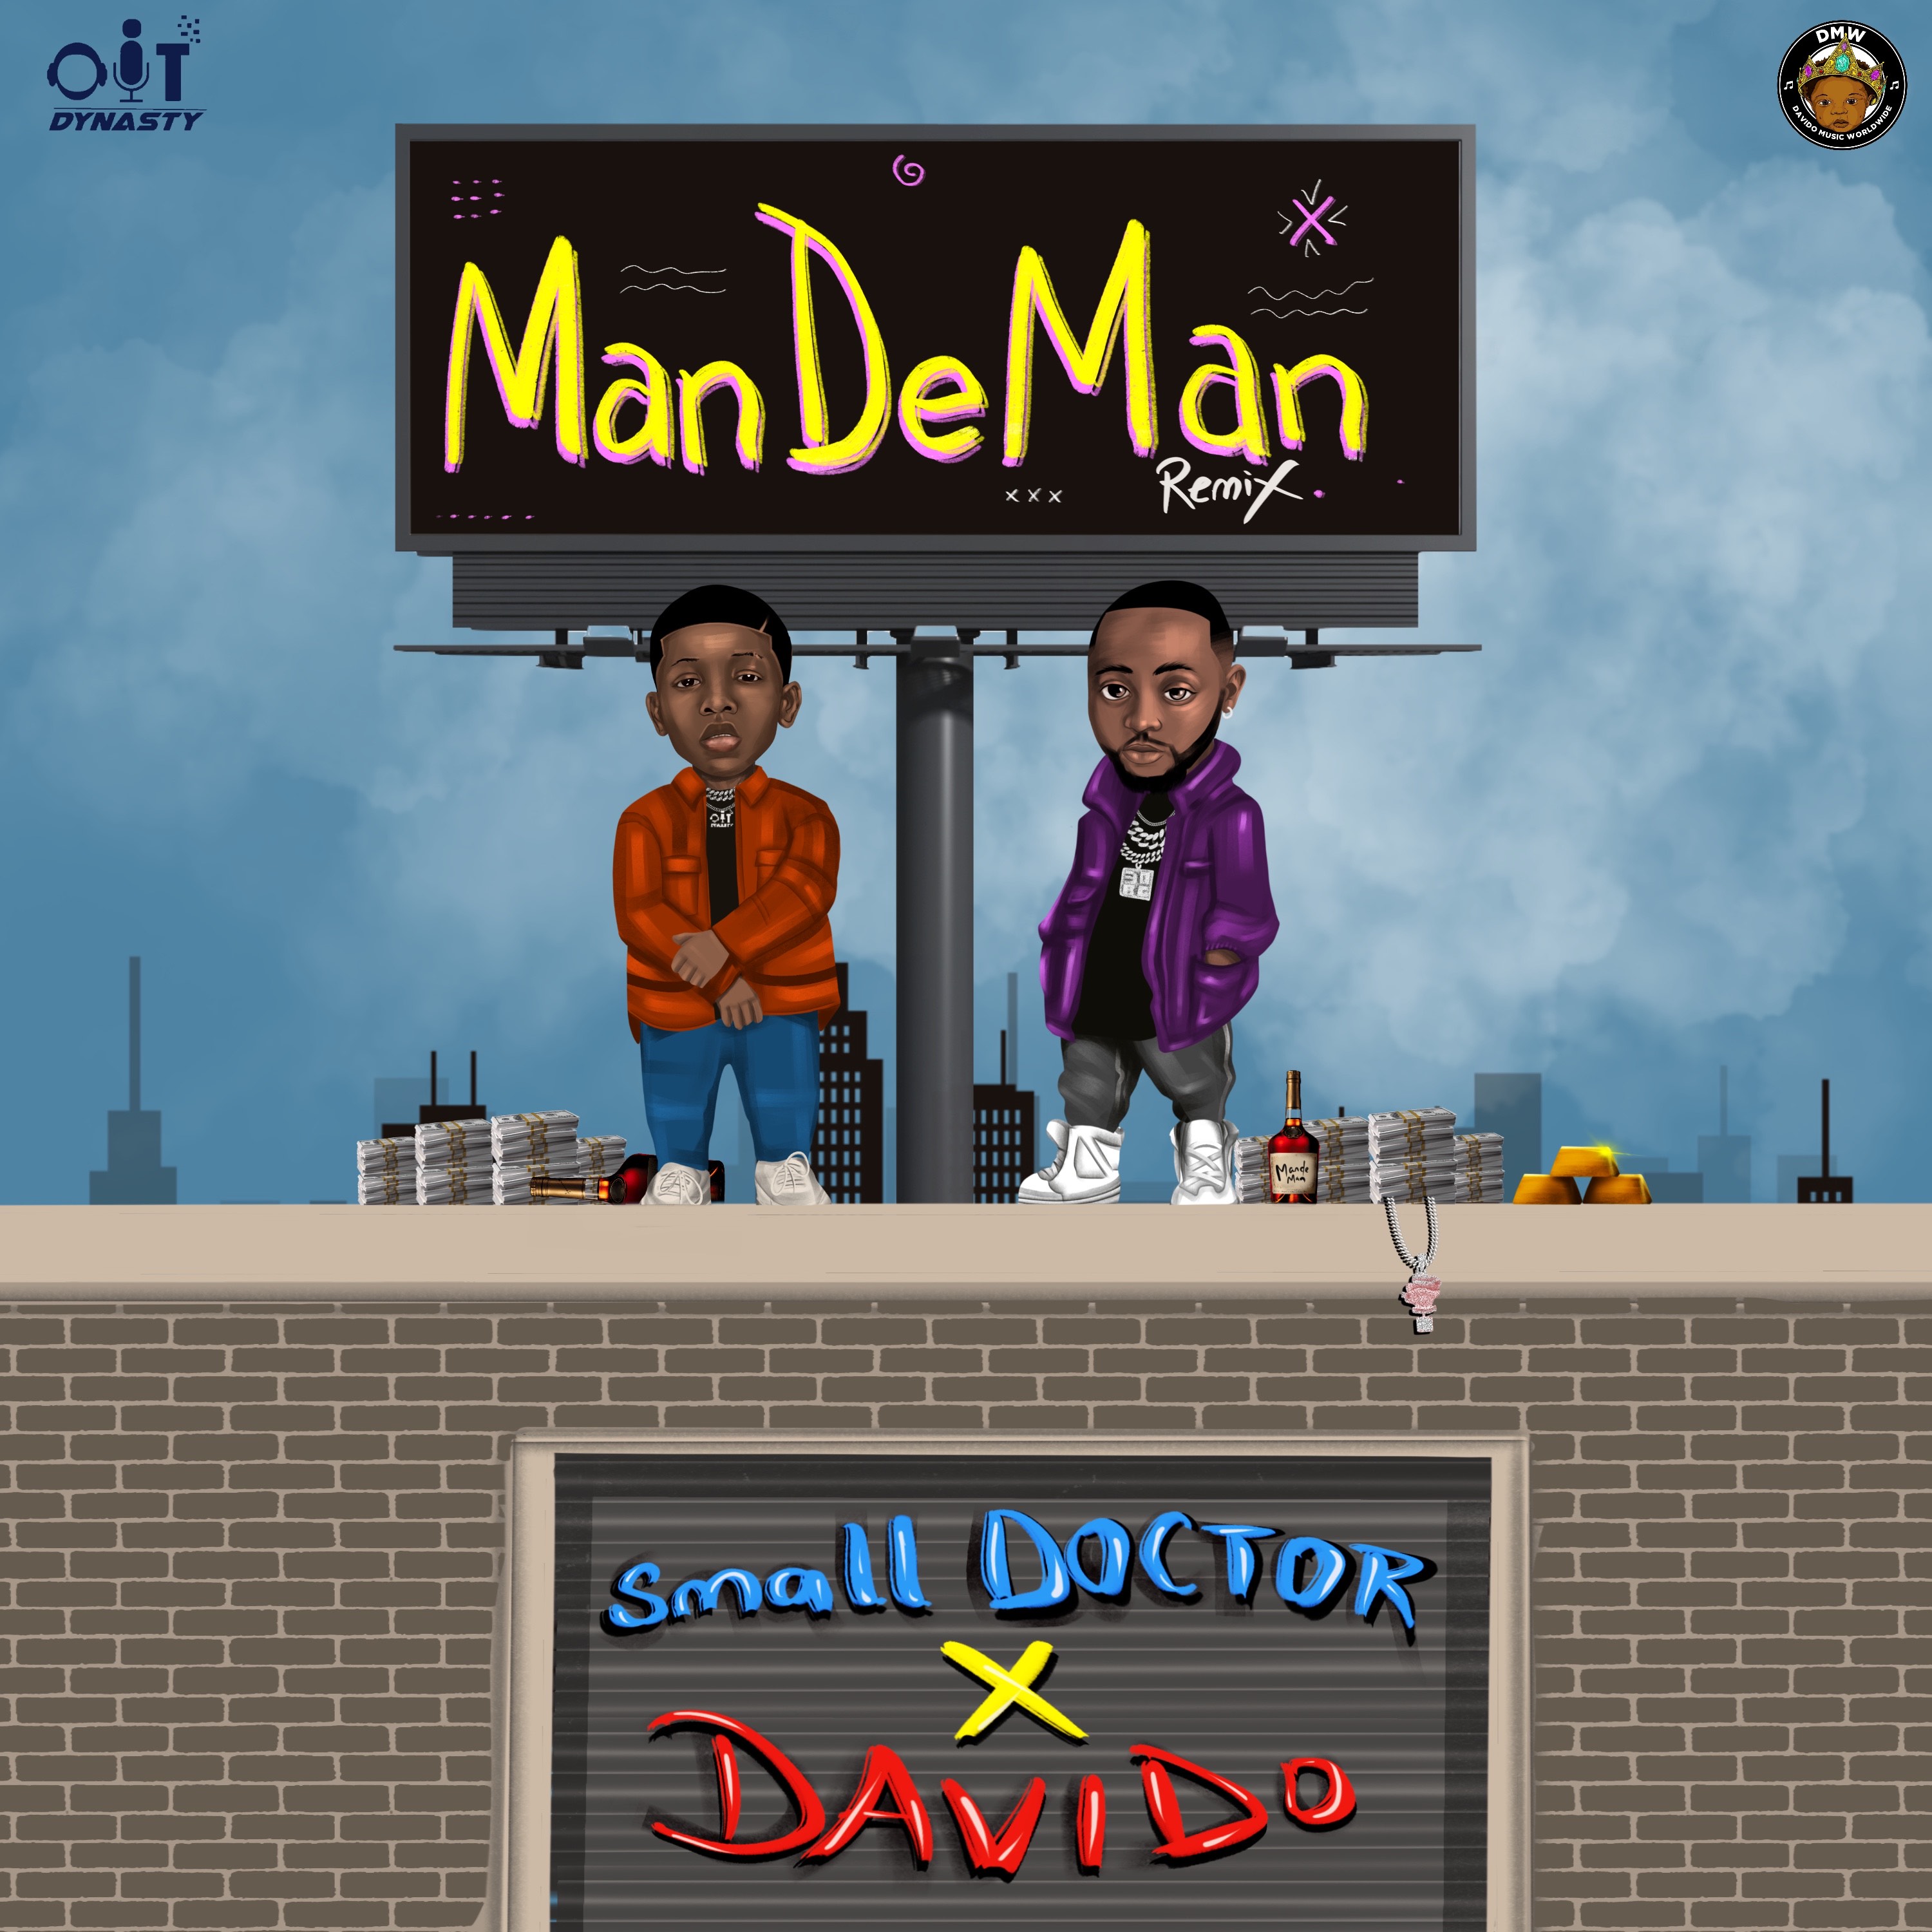 Art for ManDeMan Remix by Small Doctor, Davido